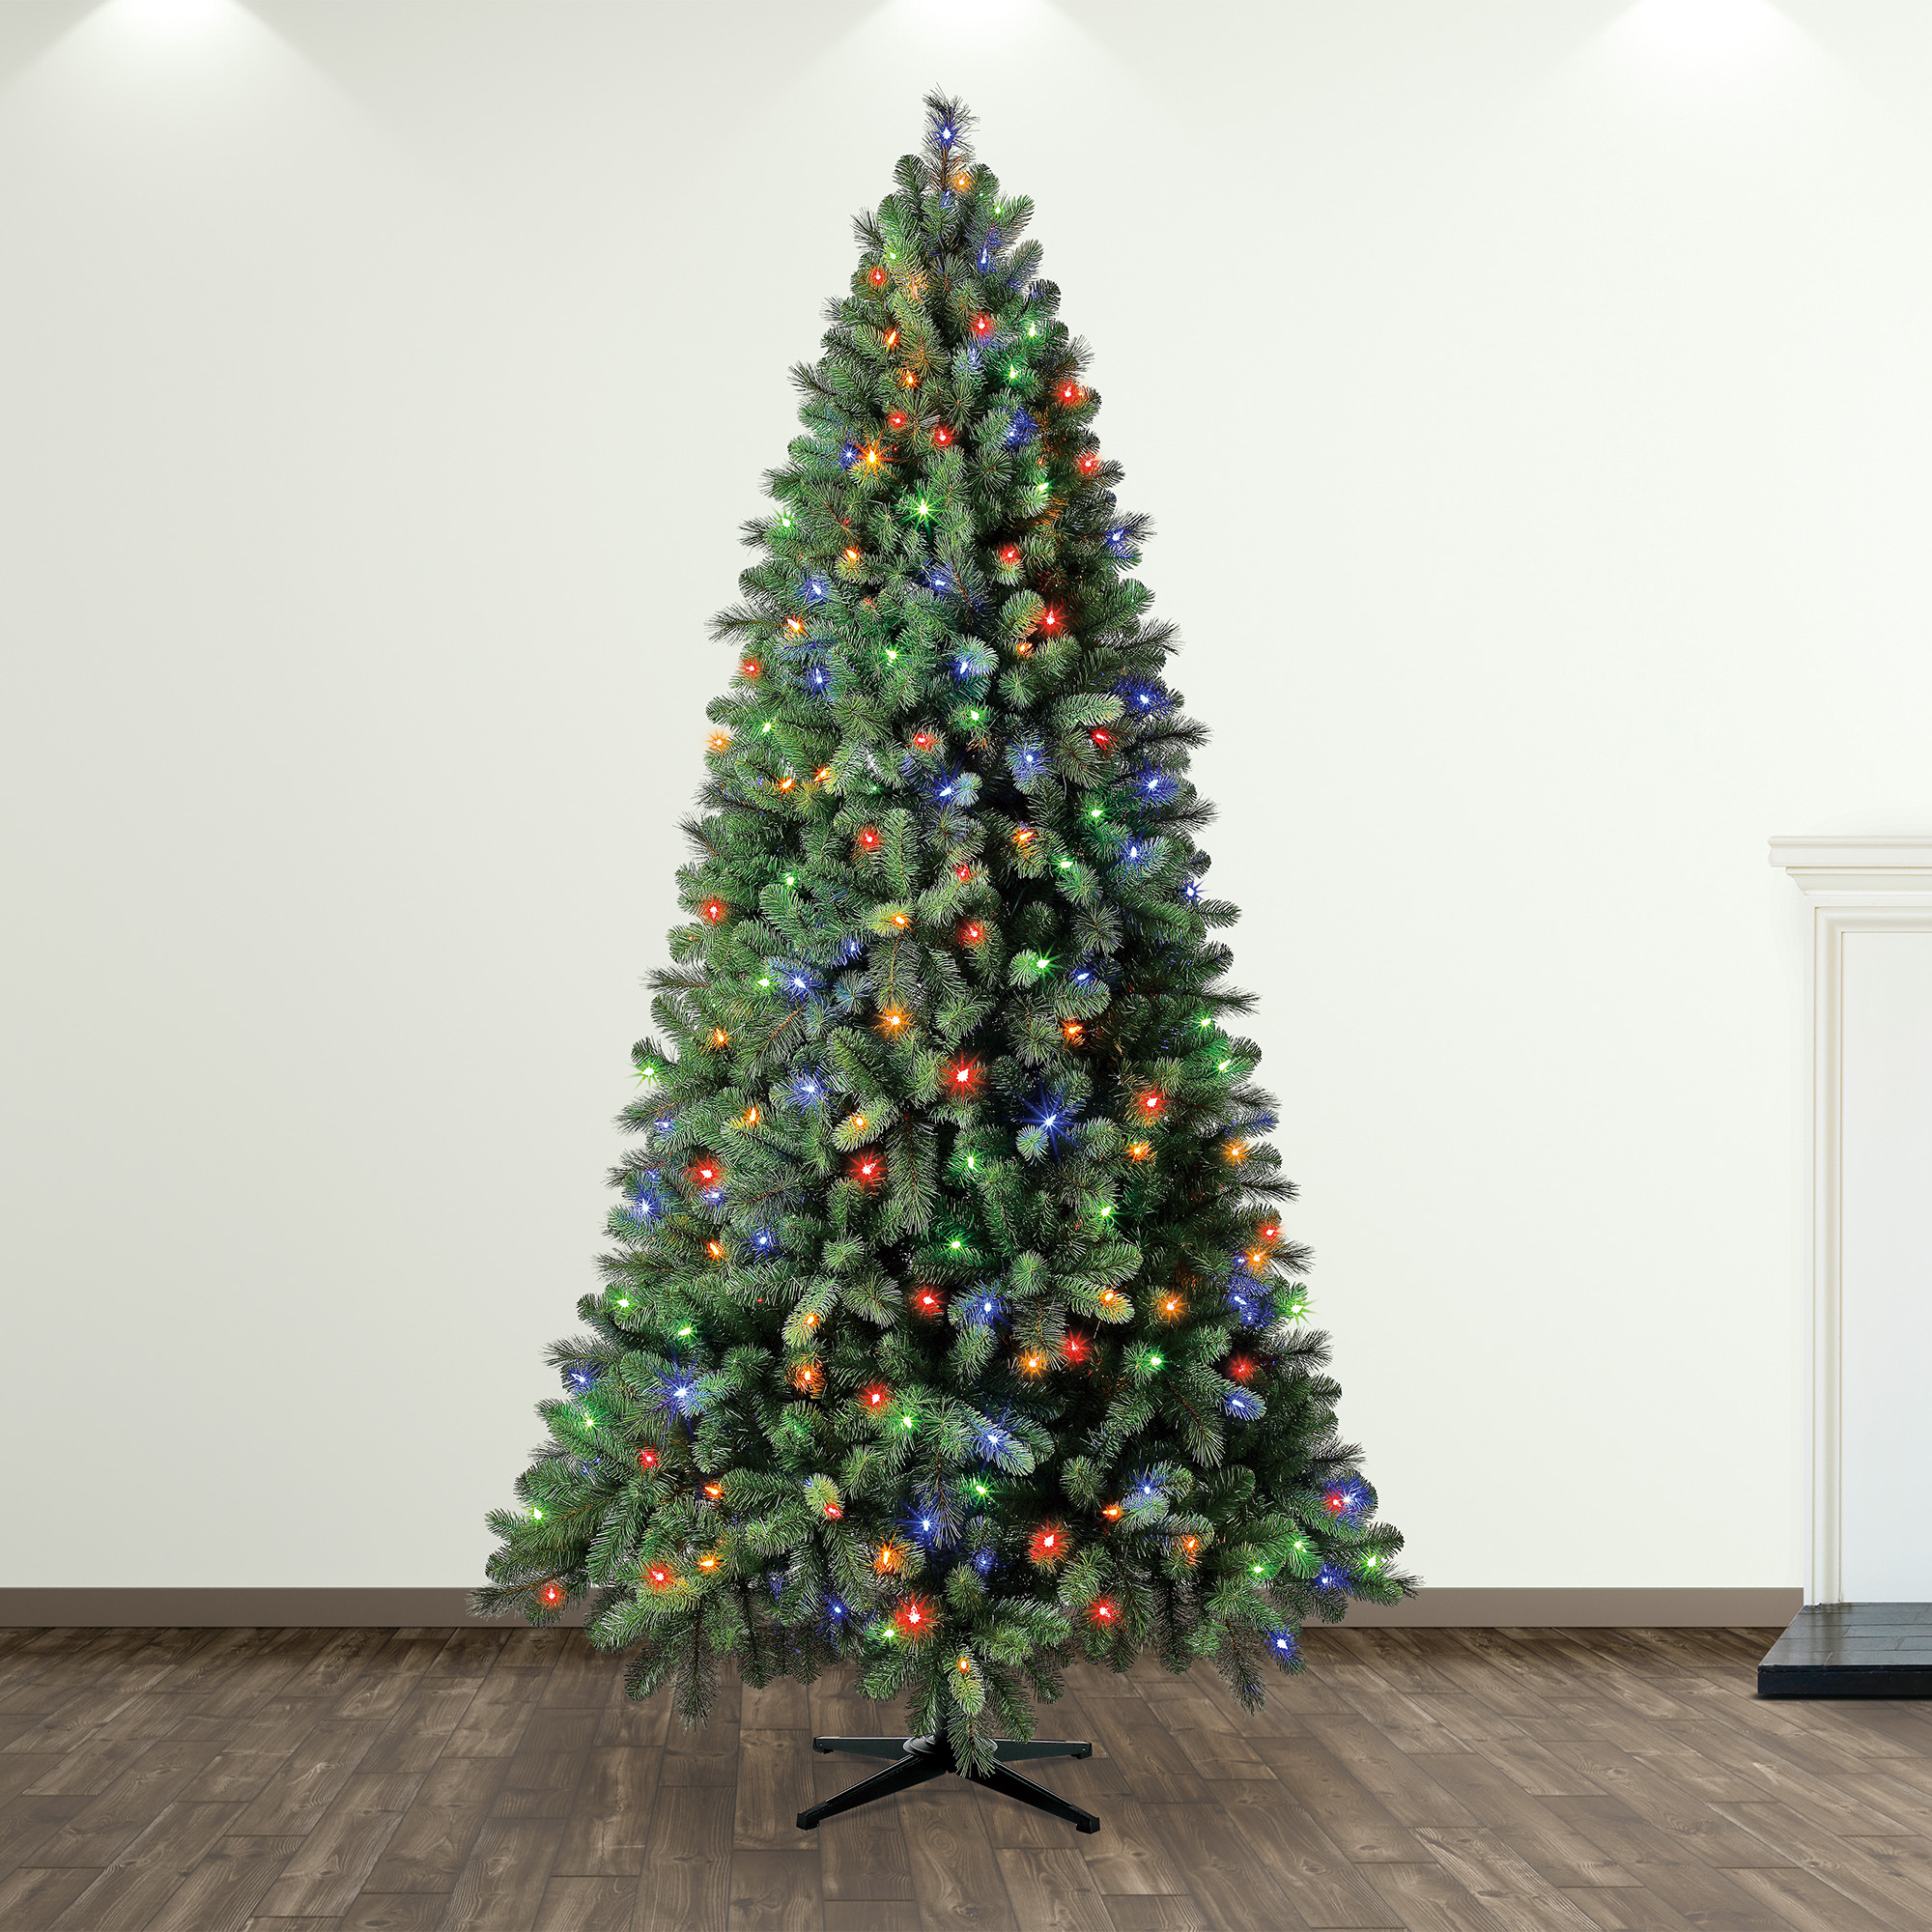 Holiday Time Multi-color Prelit LED Green Decorated Spruce Artificial Christmas Tree, with Color Changing Lights 7.5' - image 4 of 8